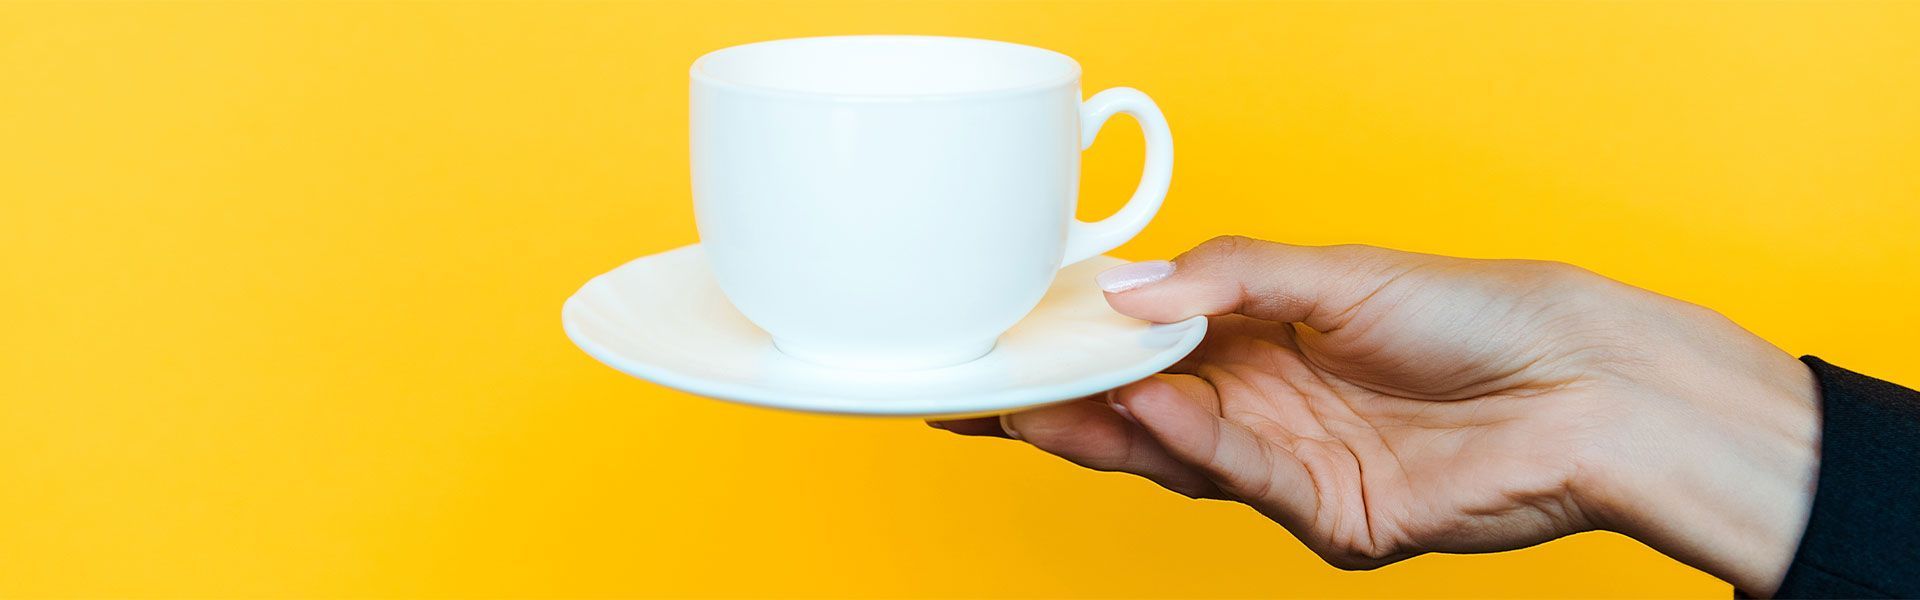 A person is holding a cup of tea on a saucer.